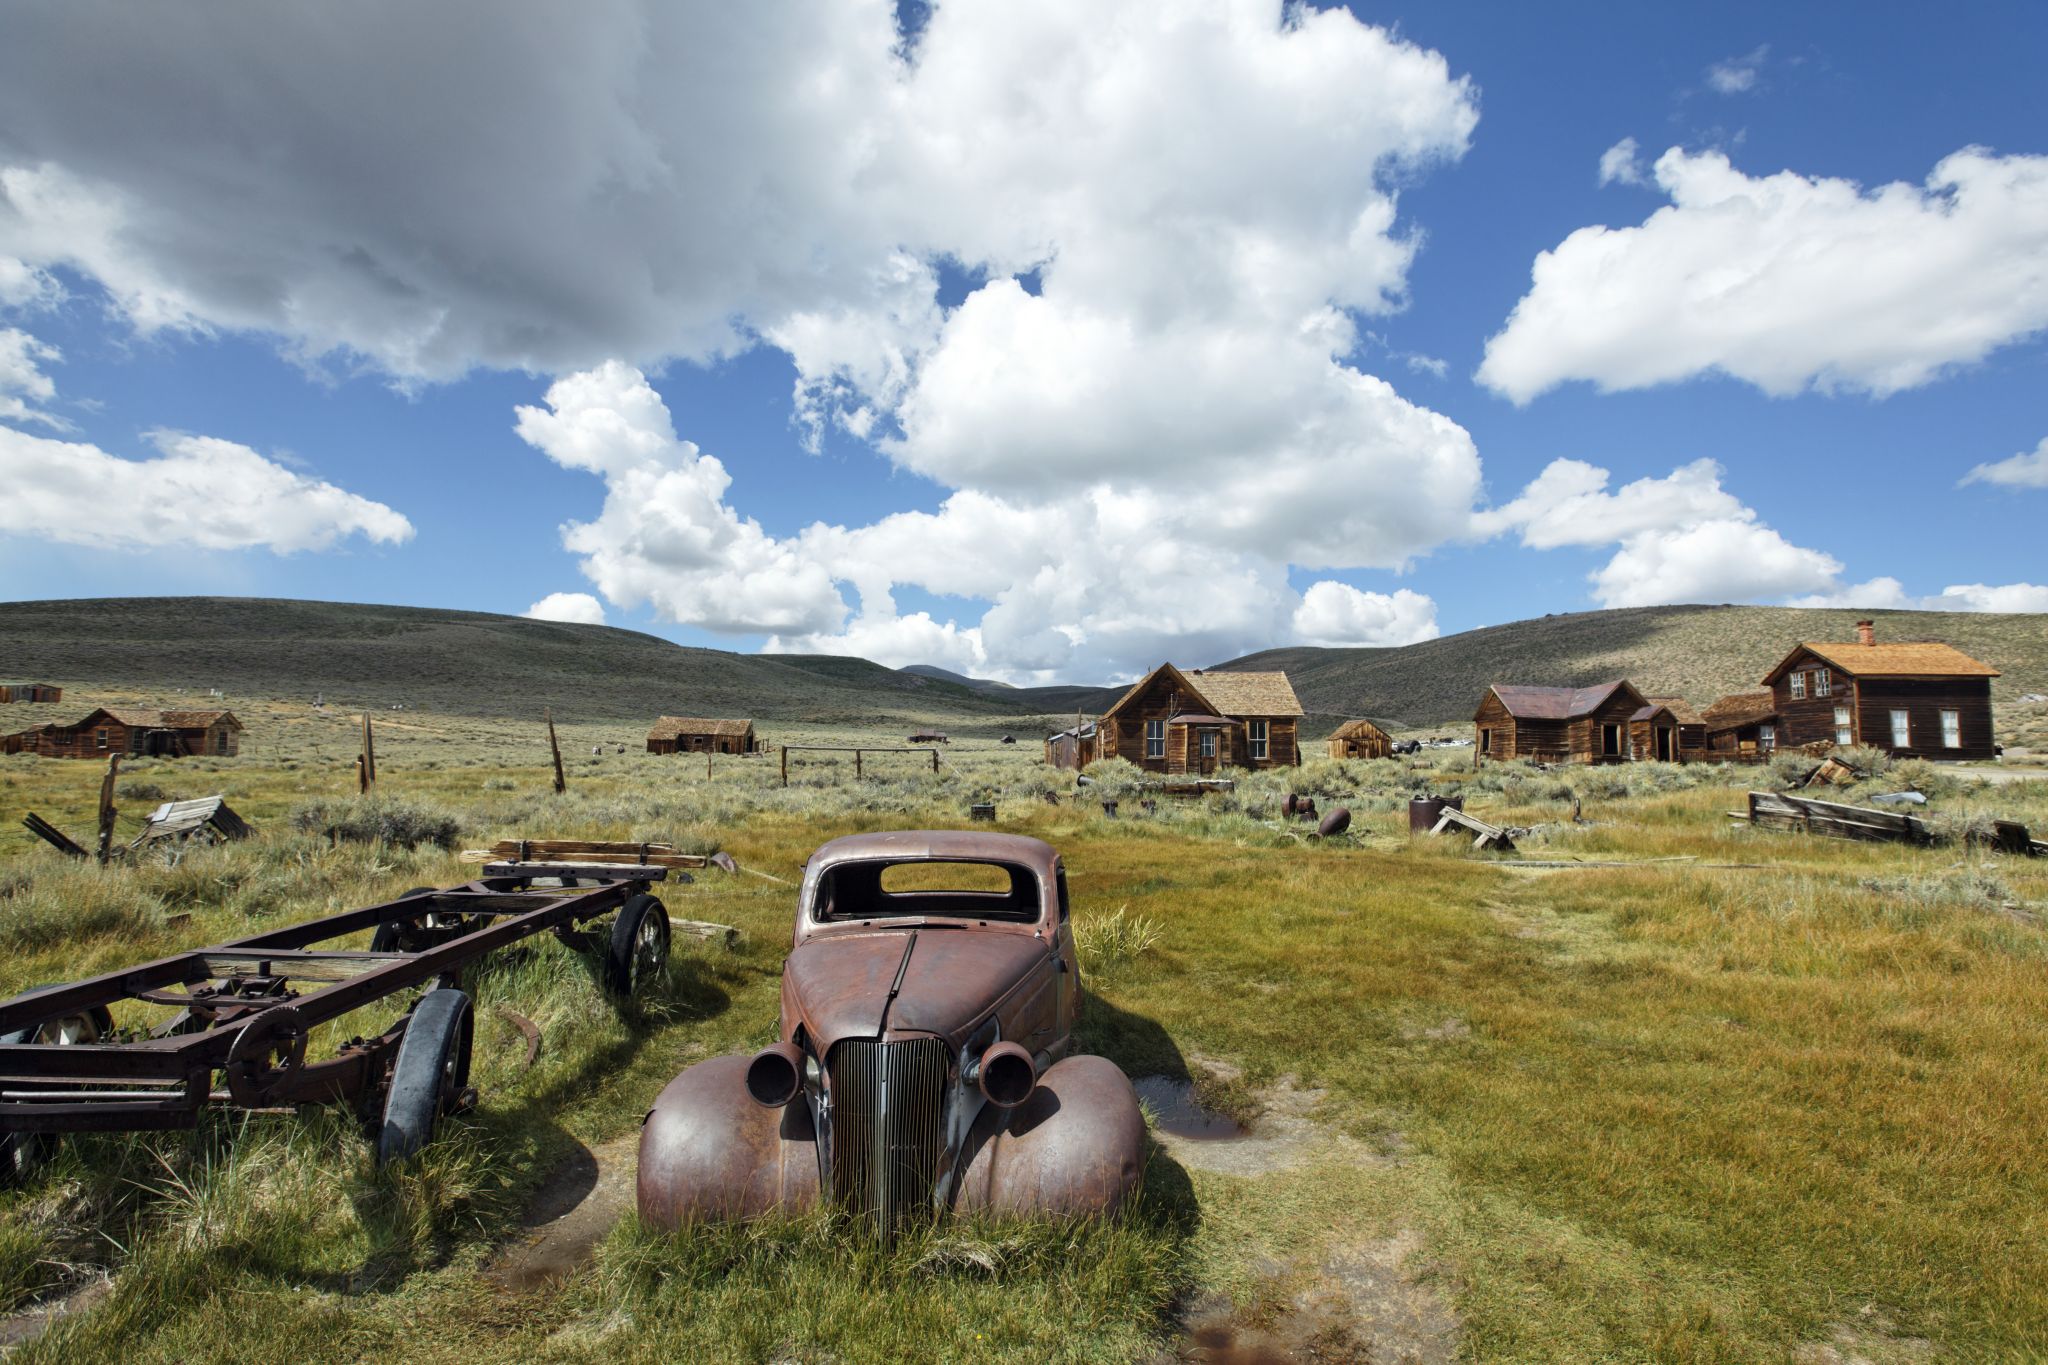 Gold Rush Ghost Town – Bodie  California State Capitol Museum